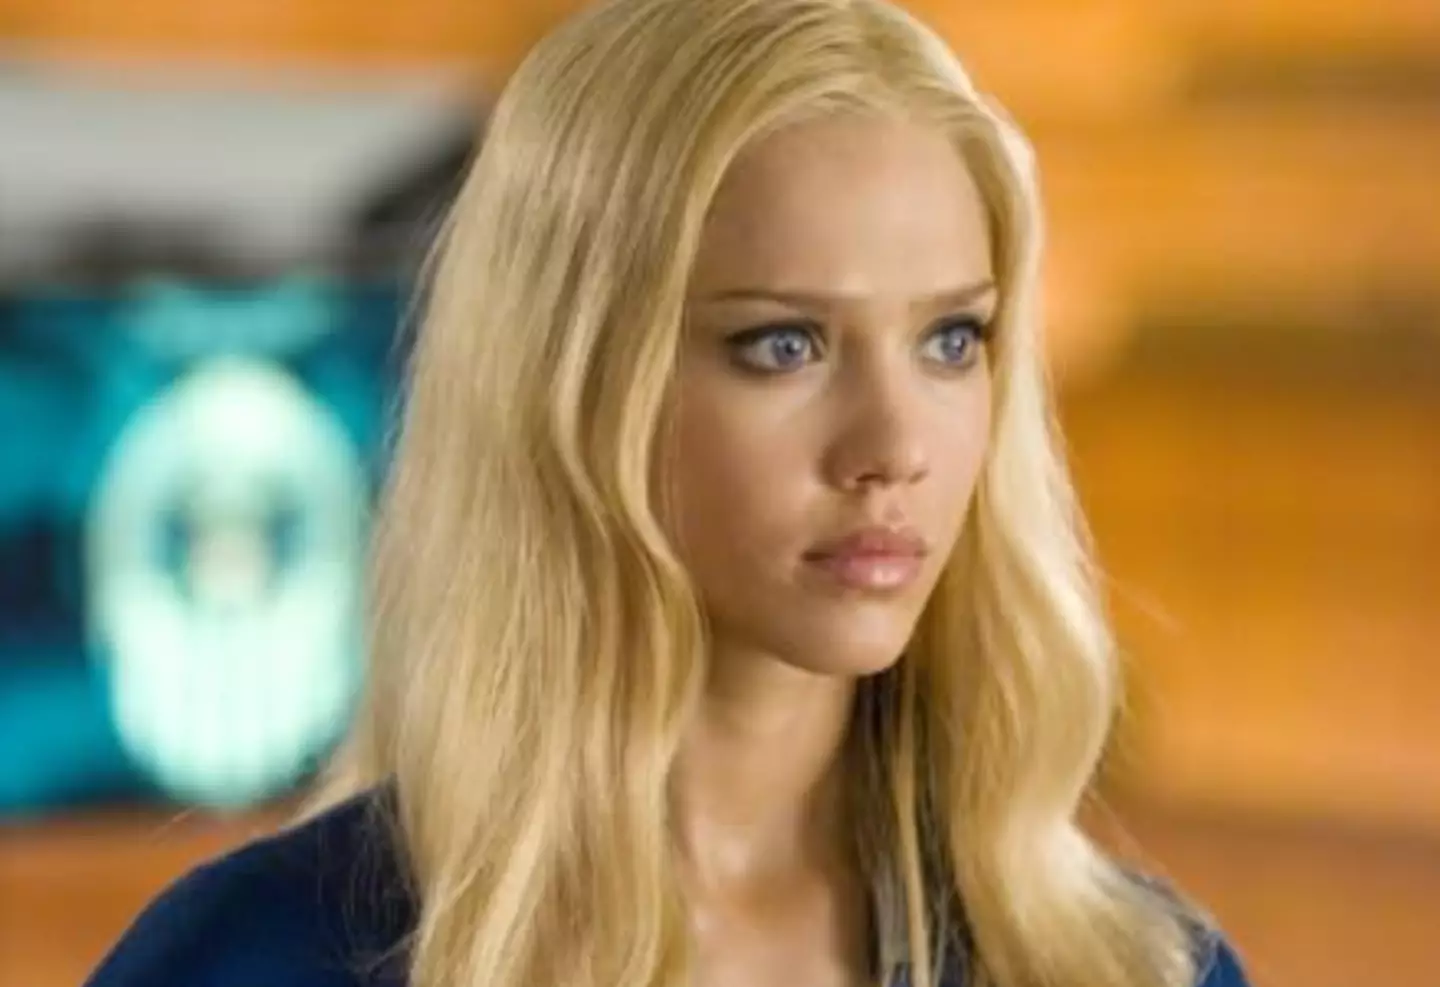 Alba starred in Fantastic Four: Rise Of The Silver Surfer as Susan Storm.